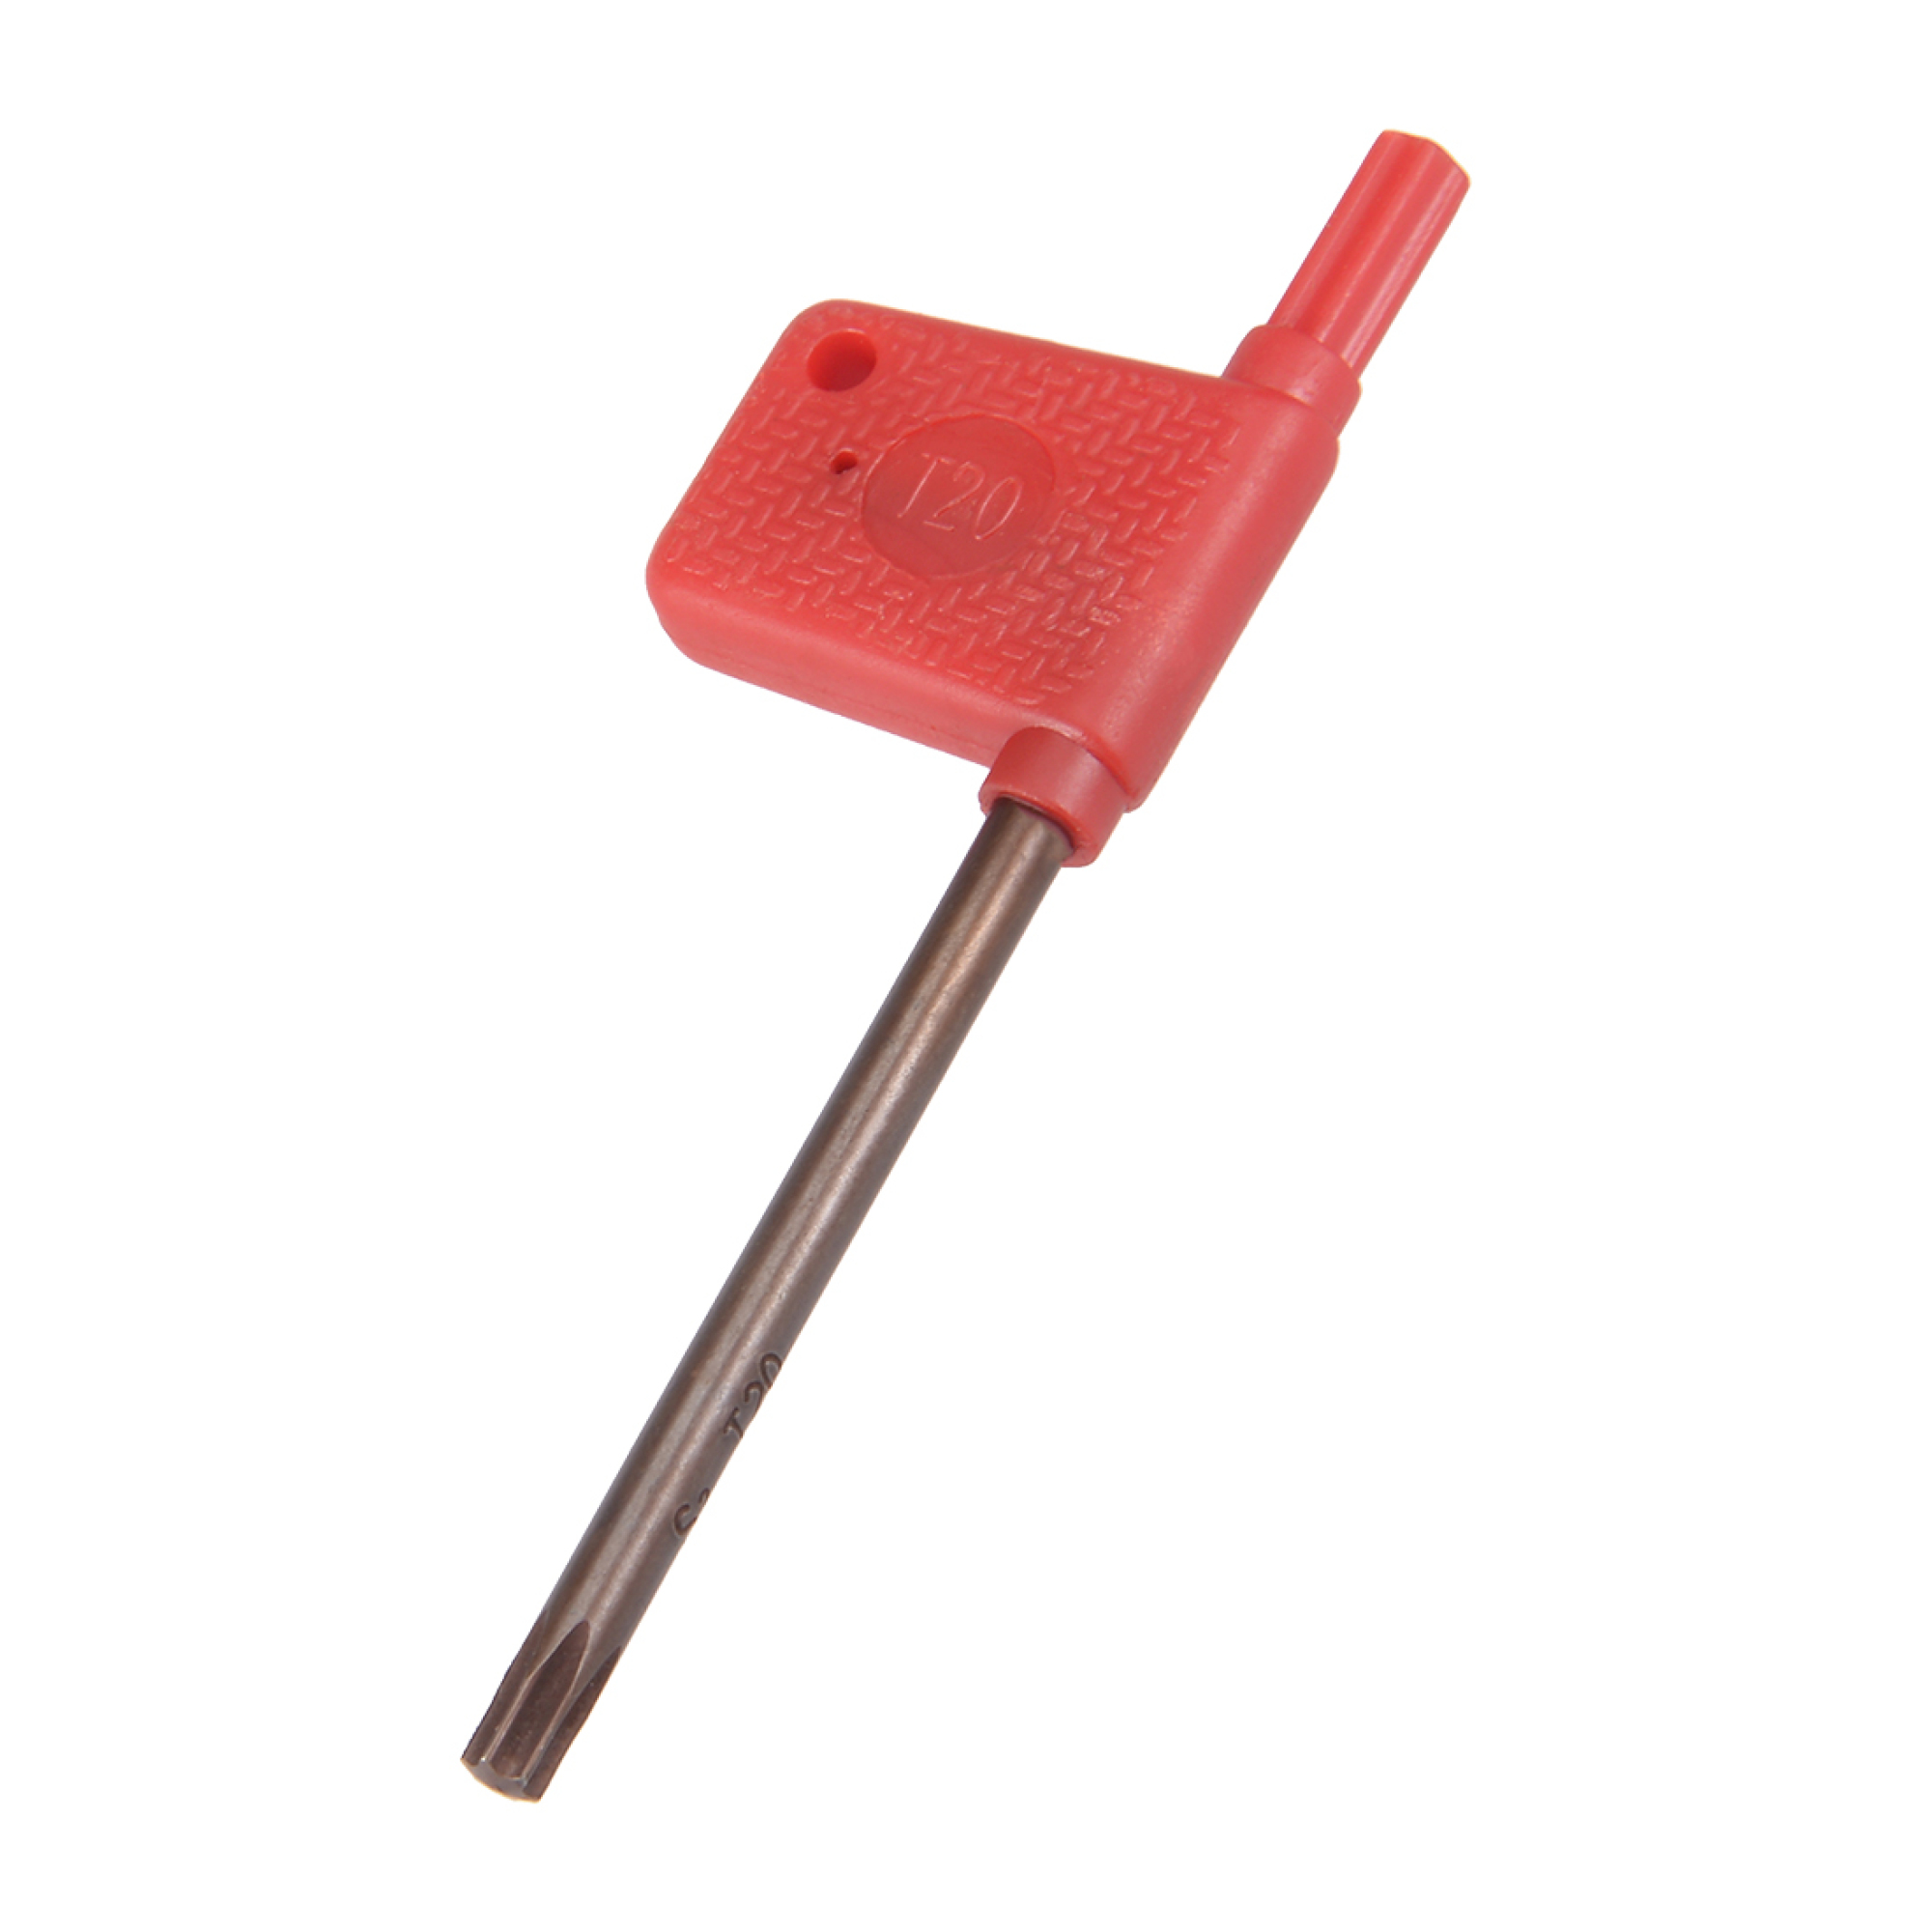 Torx Screwdriver, T20 S2 Flag Handle Star Driver Key Wrench